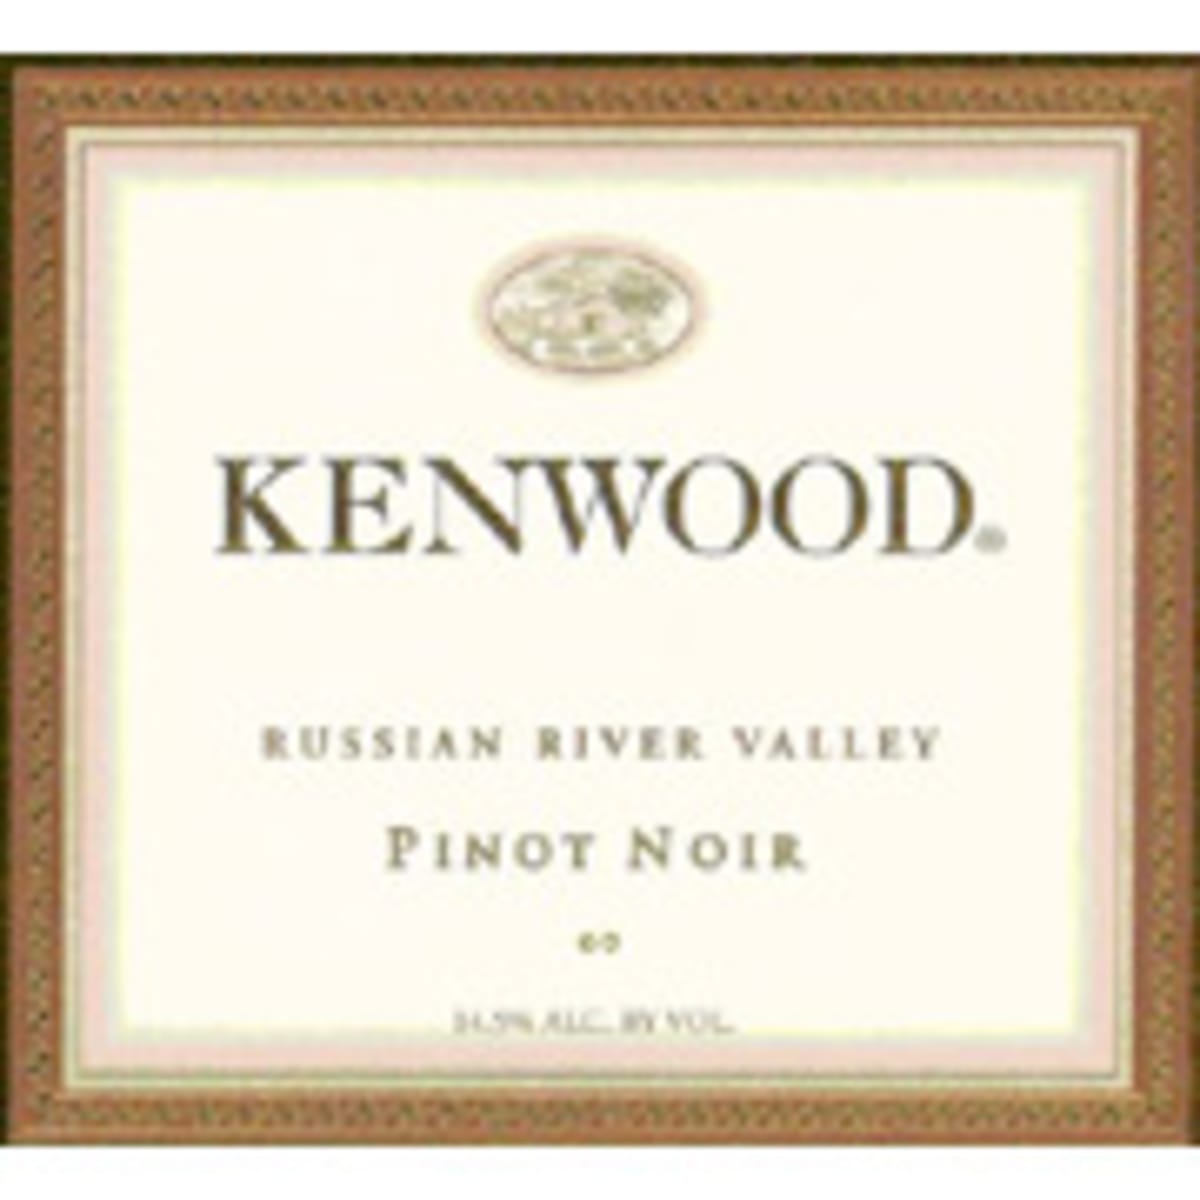 Kenwood Russian River Pinot Noir 2006 Front Label